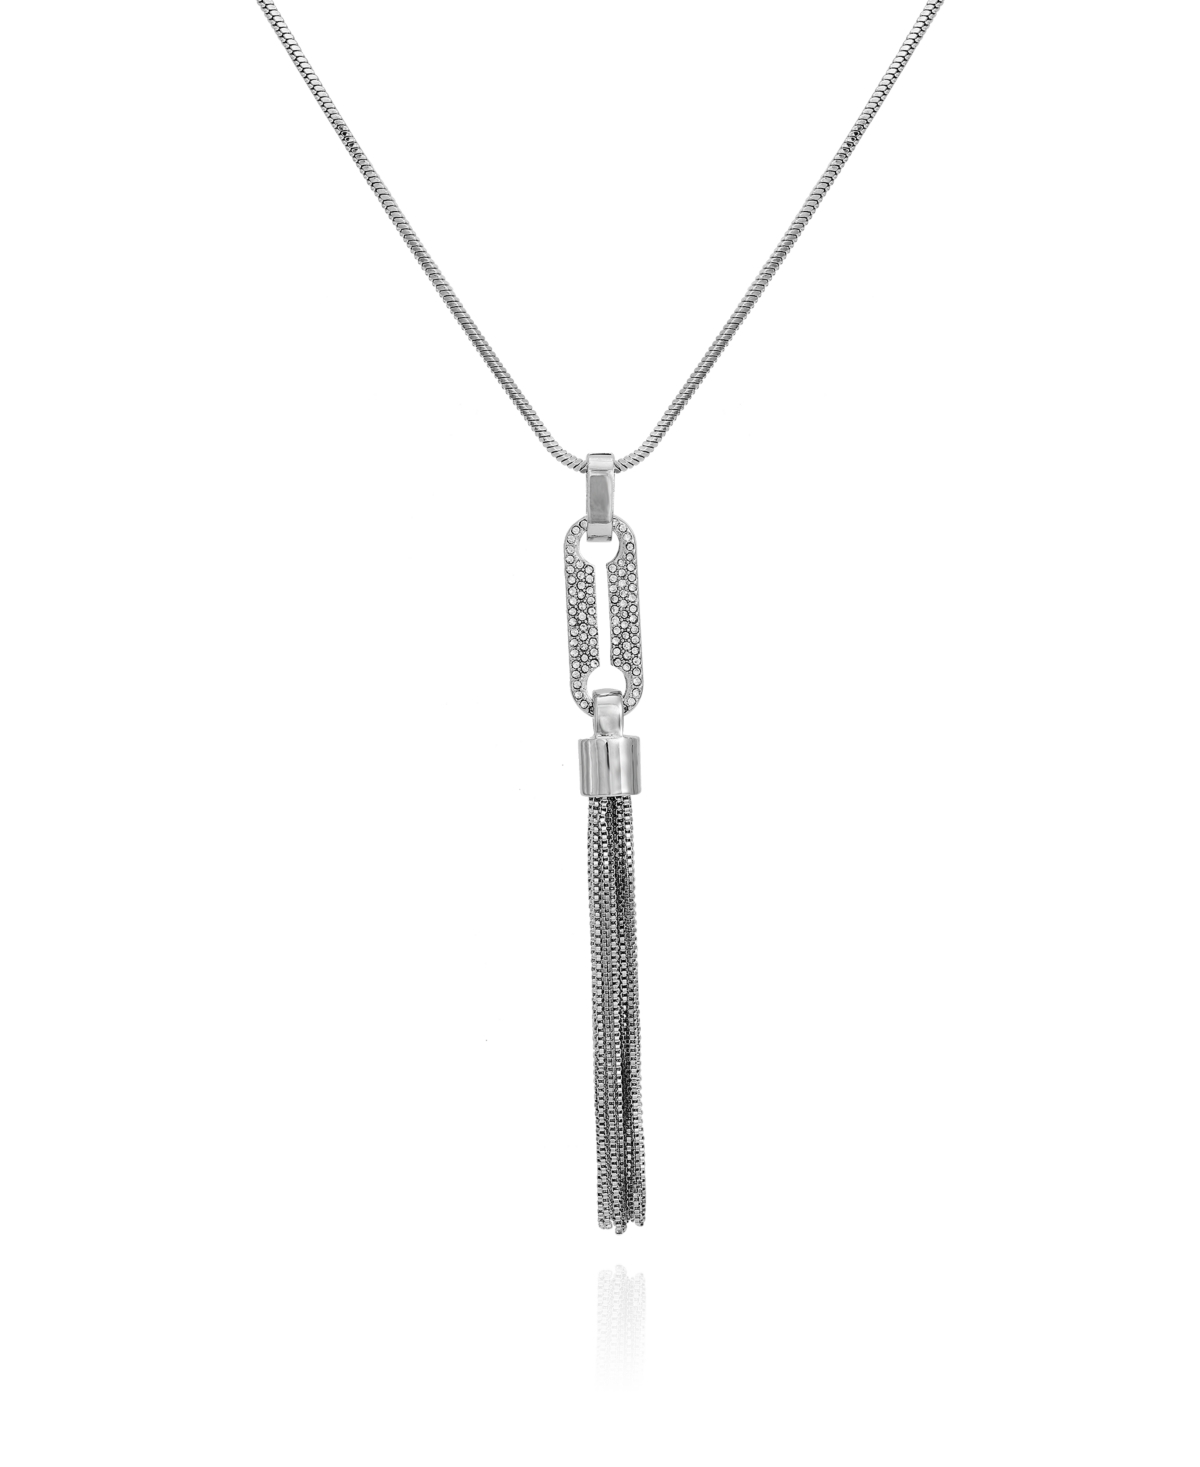 Vince Camuto Silver-tone Long Chain And Tassel Pendant Necklace, 30" + 2" Extender